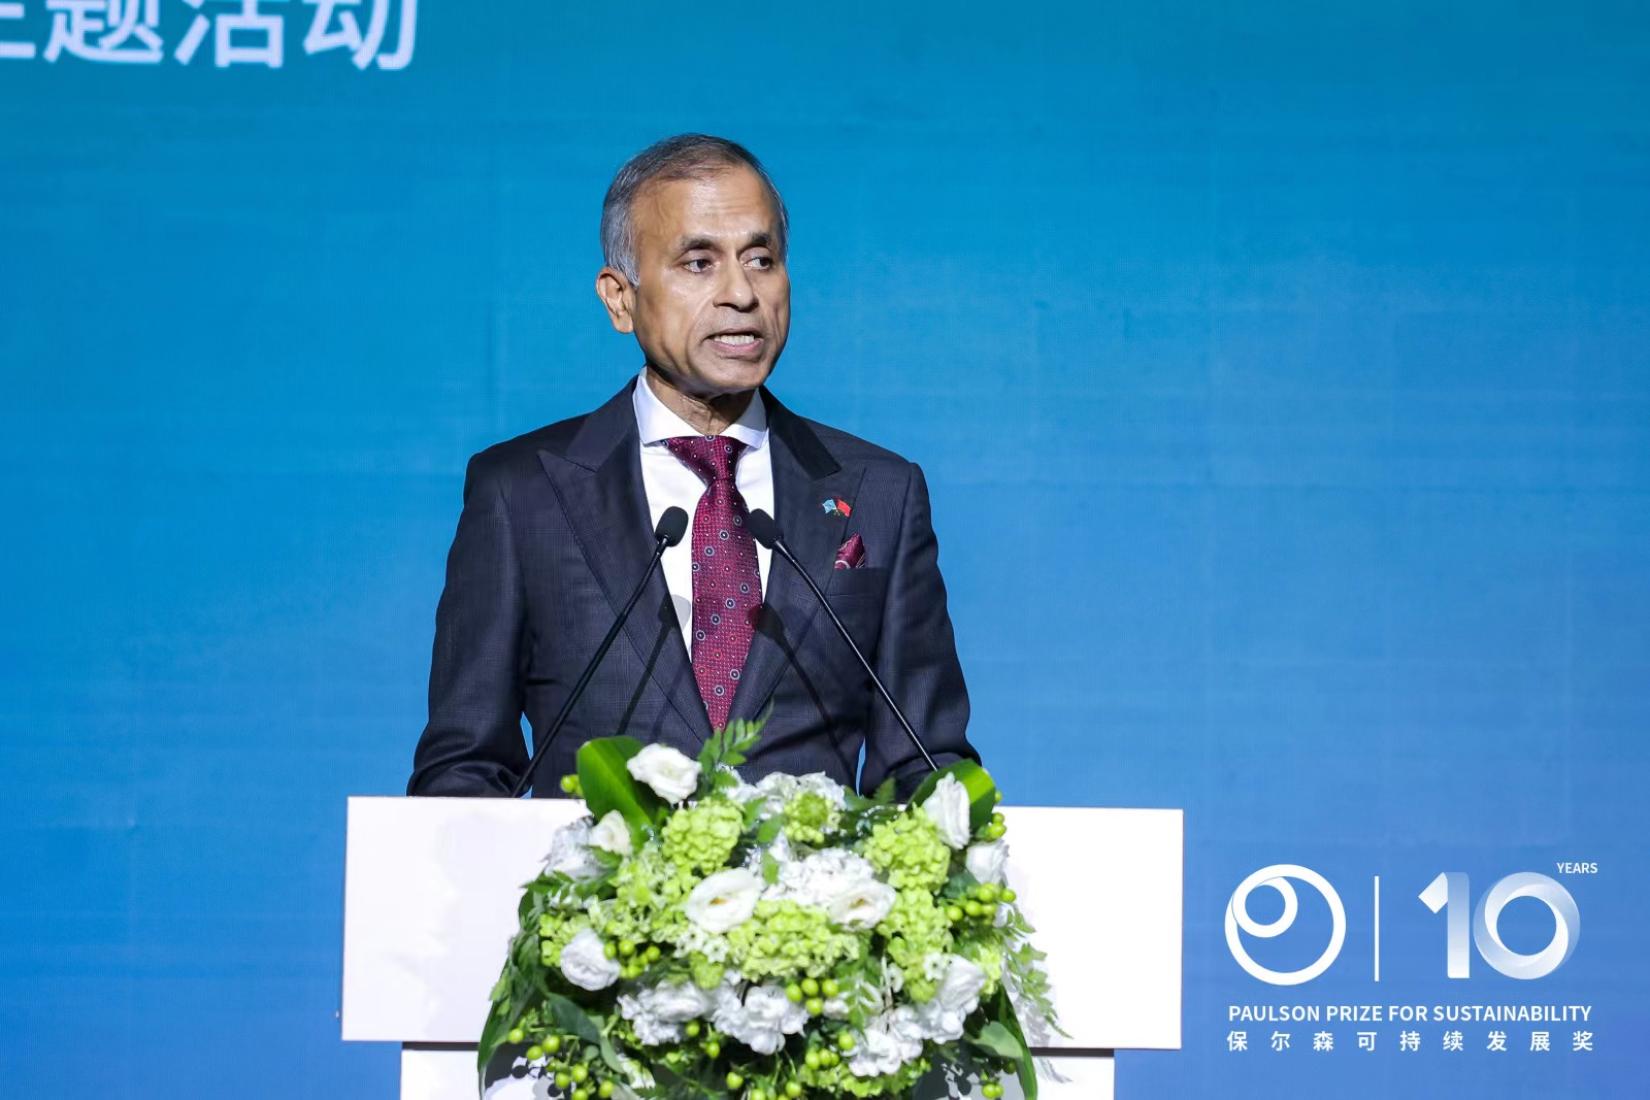 UN Resident Coordinator in China Siddharth Chatterjee at Paulson Prize 10th Anniversary Event 